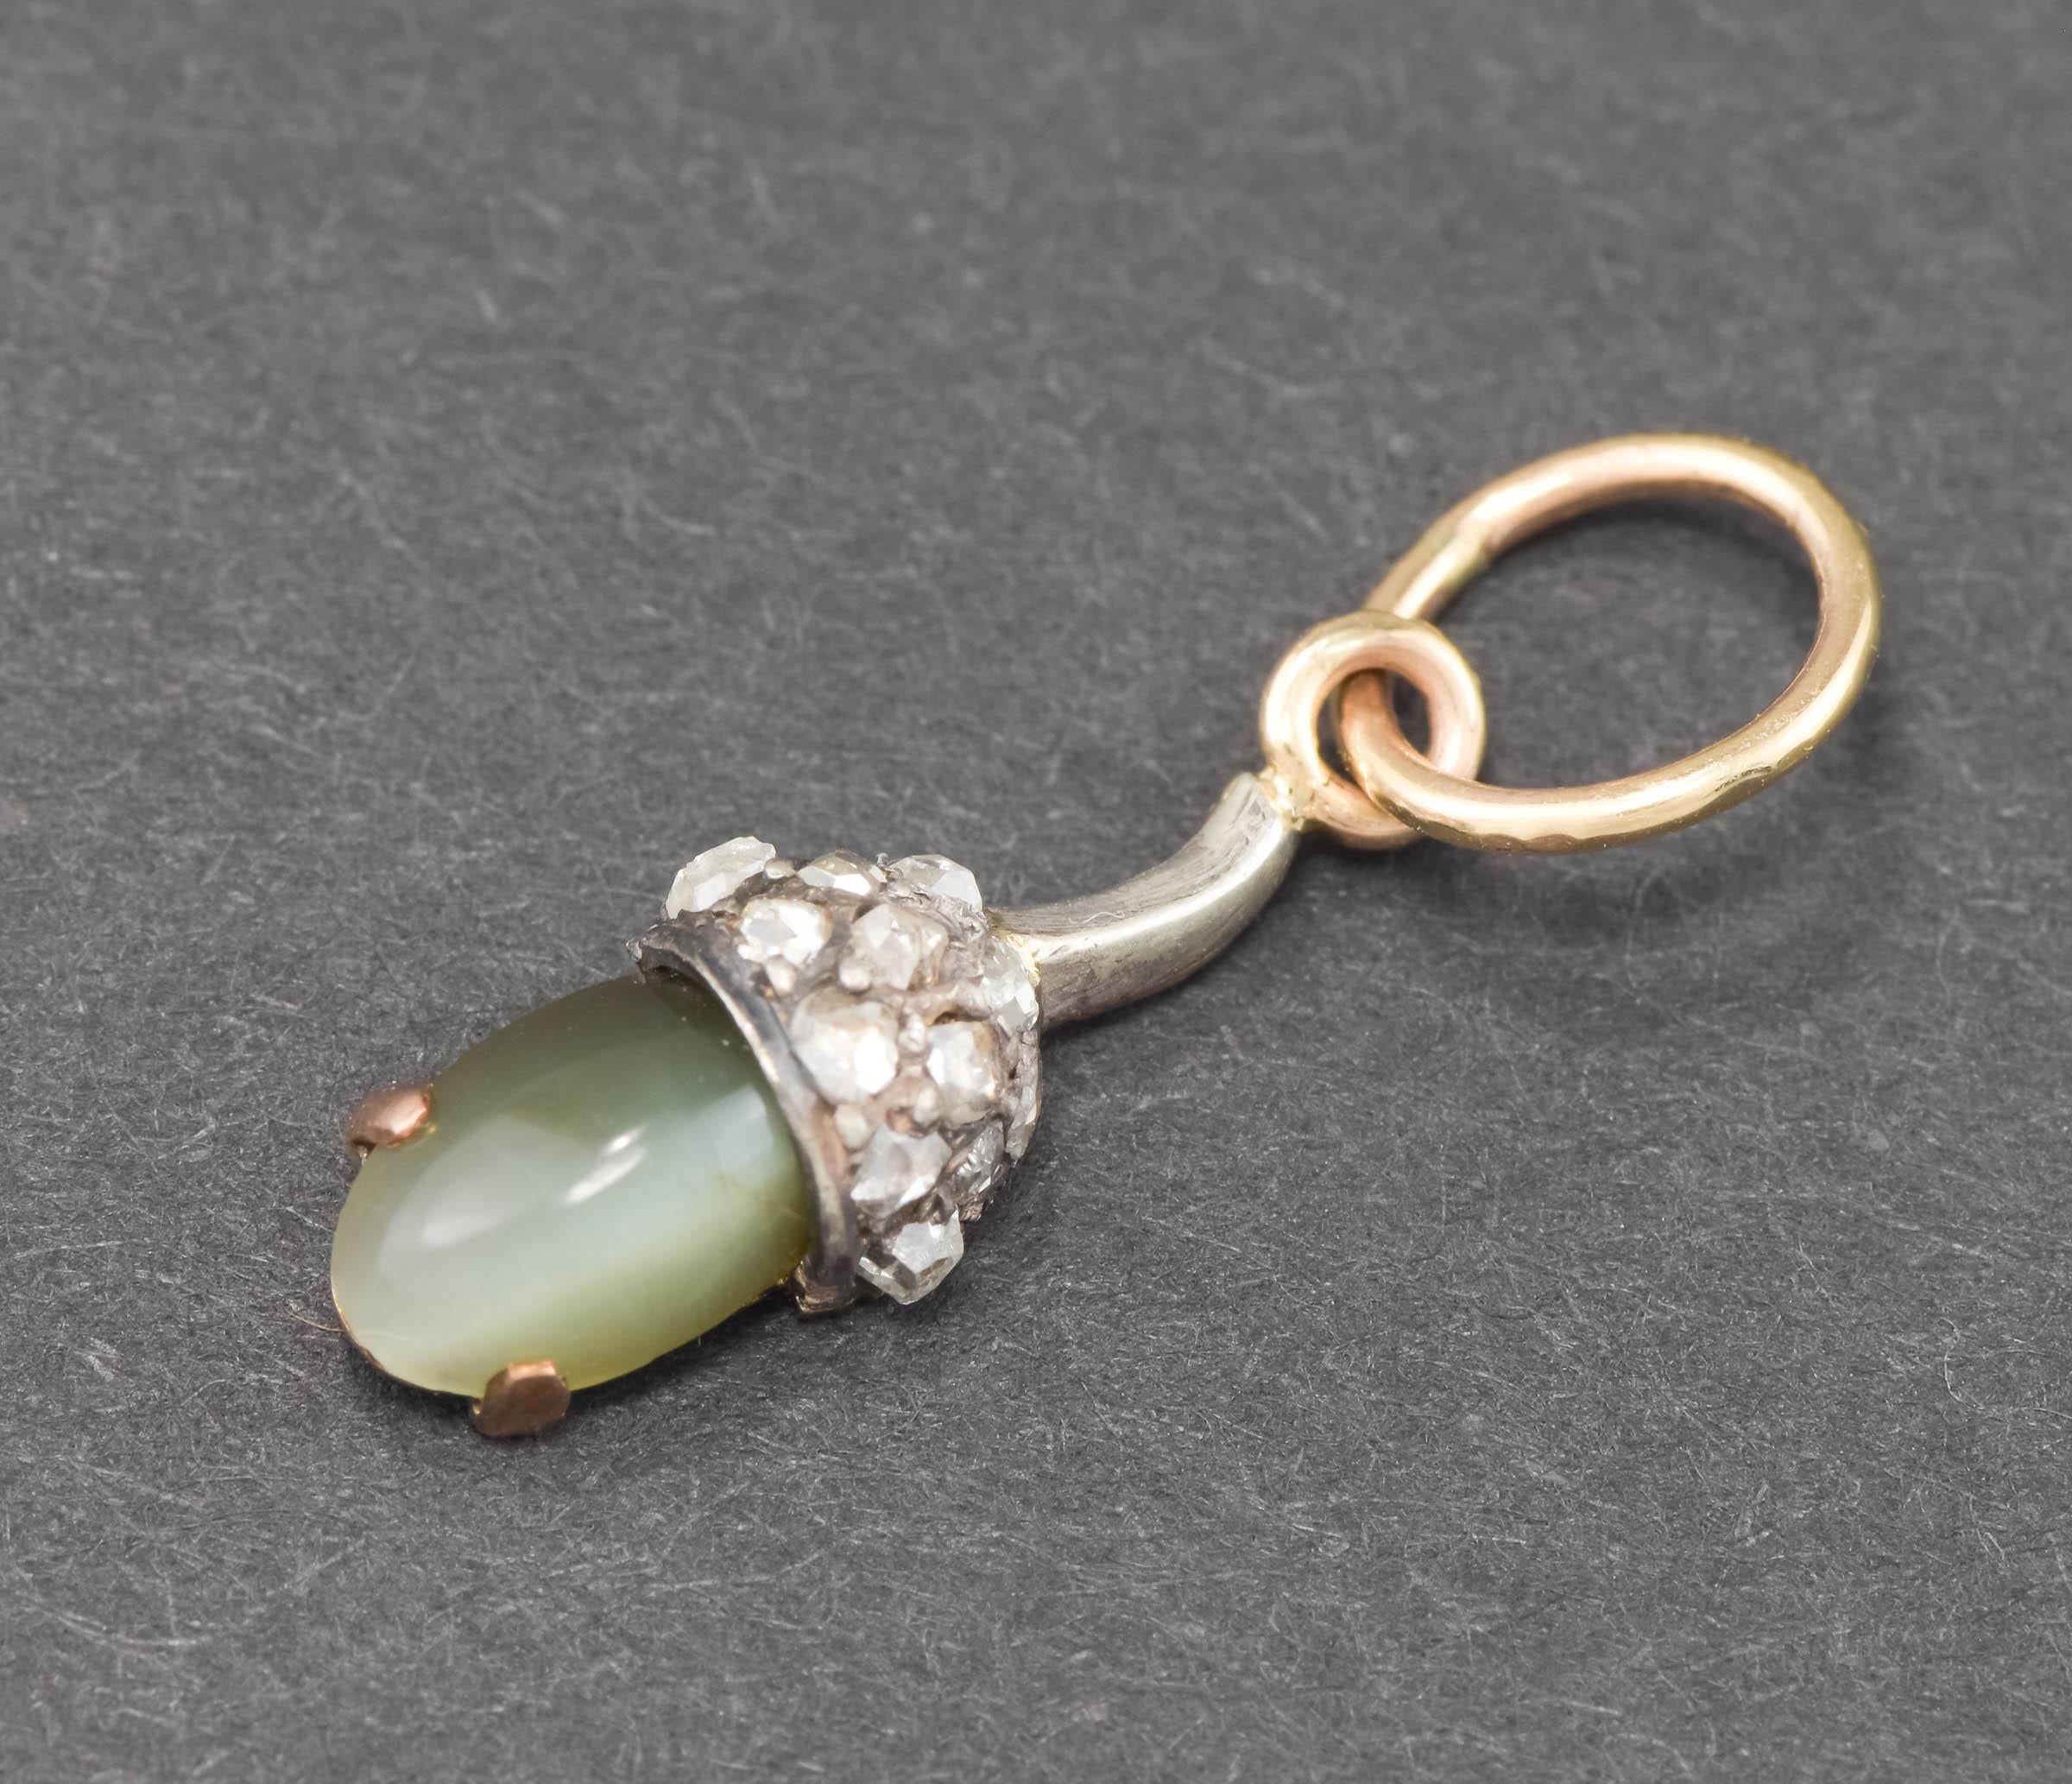 
Dainty, elegant and beautifully made, this Victorian era diamond and chrysoberyl acorn was originally part of a cravat pin; I have converted it into a wonderful charm pendant.  (Acorns have symbolized strength, potential, immortality and fertility